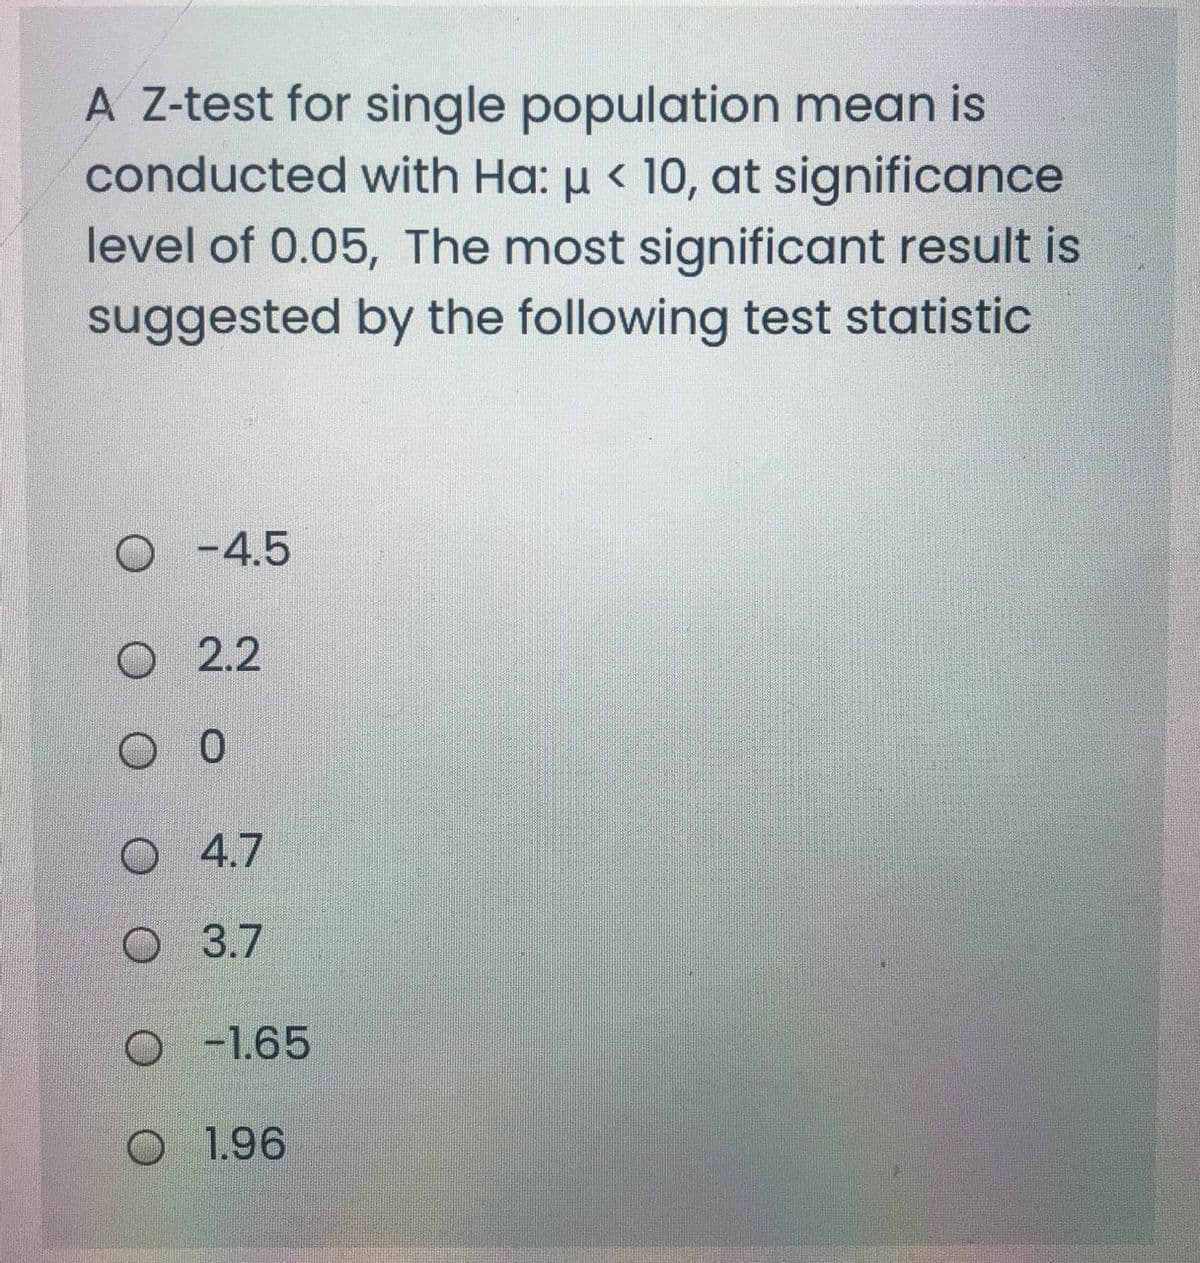 A Z-test for single population mean is
conducted with Ha: µ < 10, at significance
level of 0.05, The most significant result is
suggested by the following test statistic
O -4.5
O 2.2
O 4.7
O 3.7
O -1.65
O 1.96
